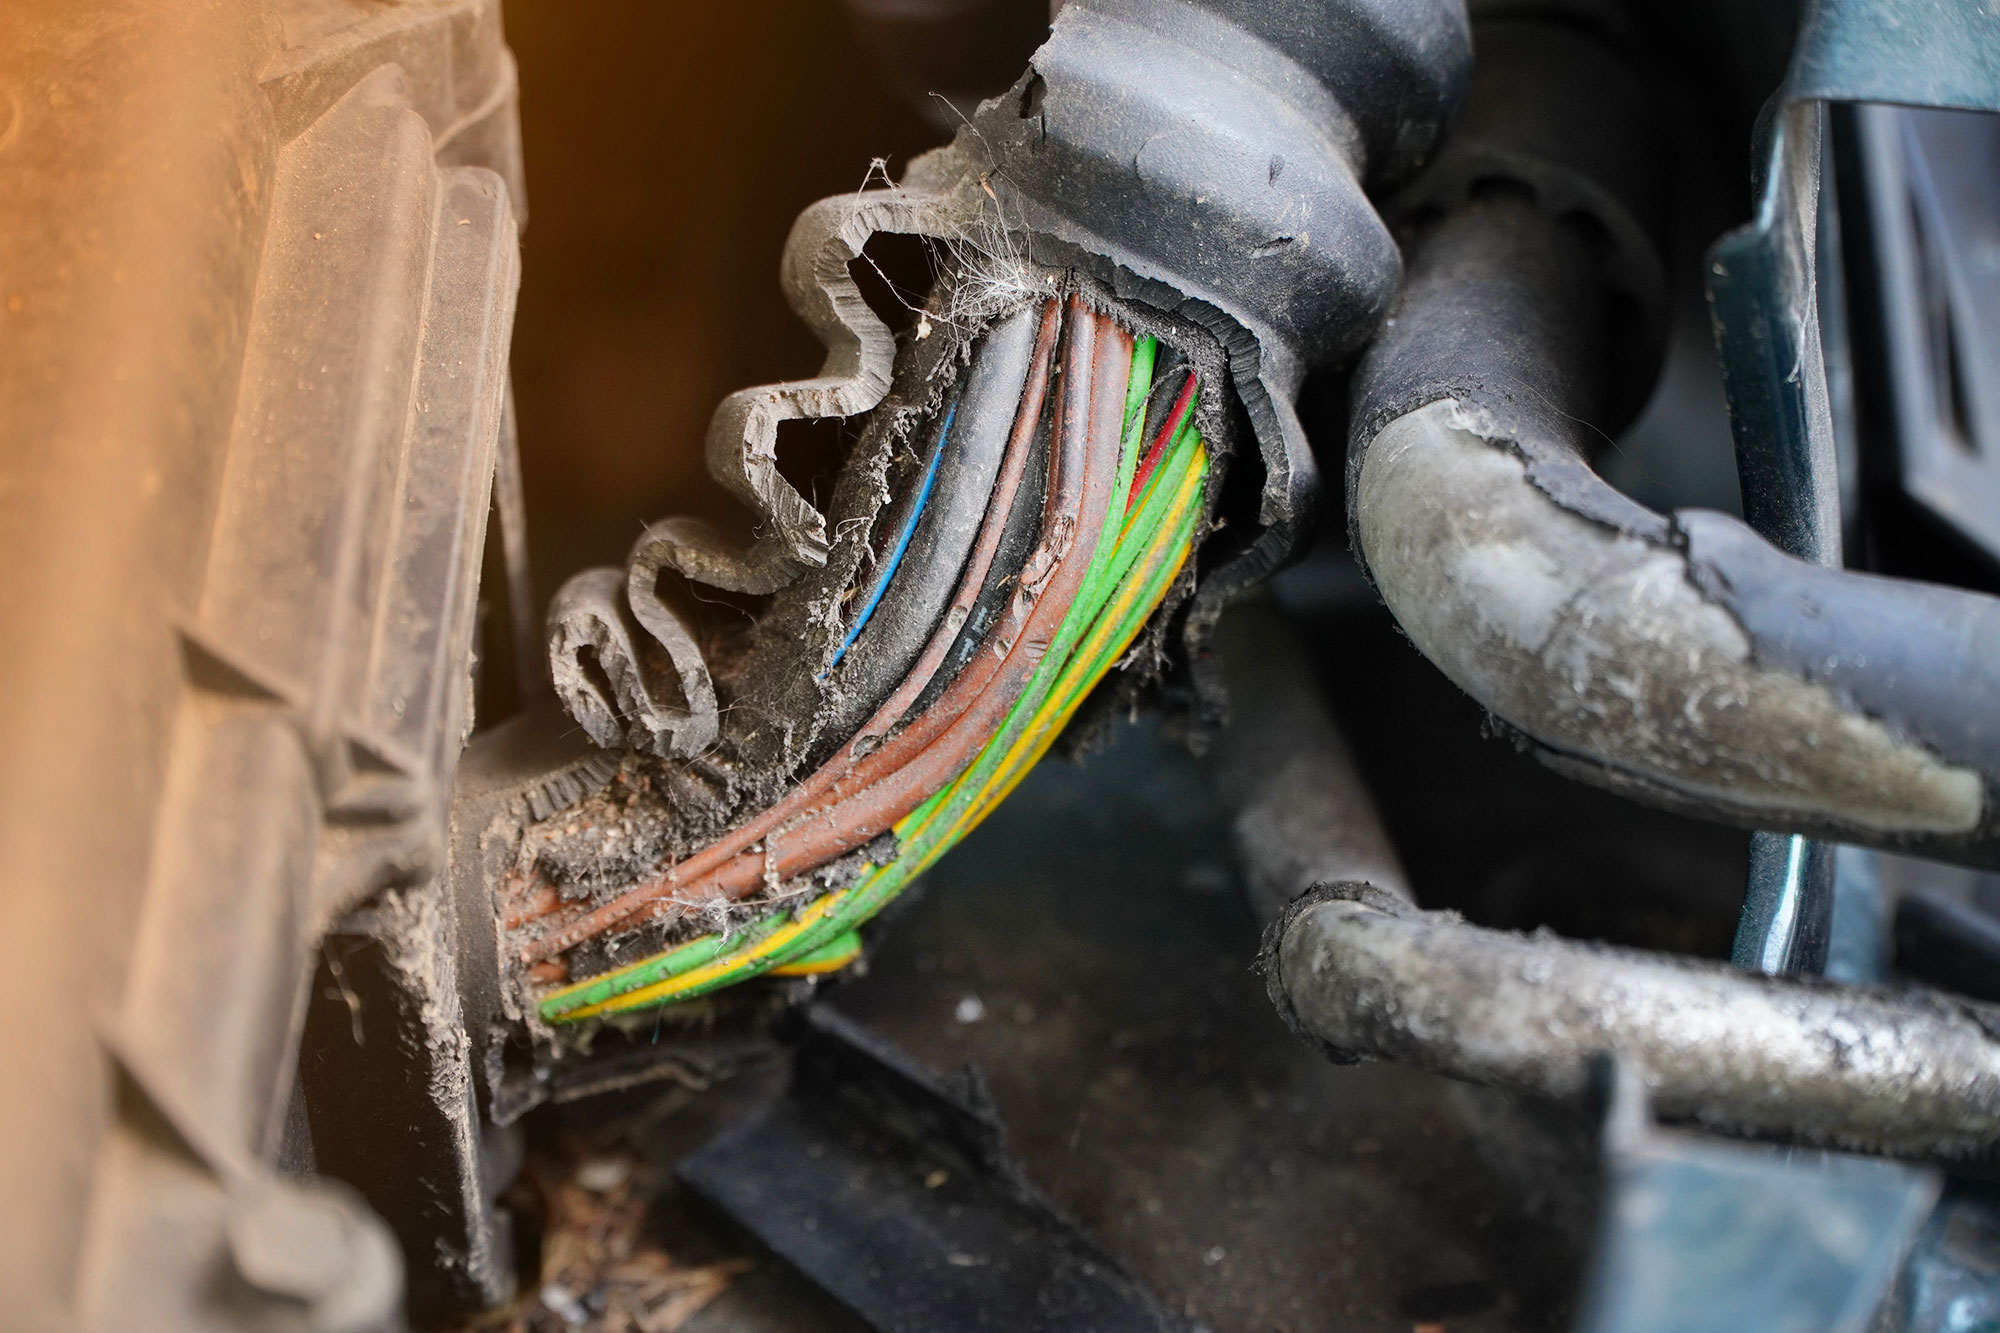 Damaged wiring and connectors from rodents or corrosion can cause electrical problems.